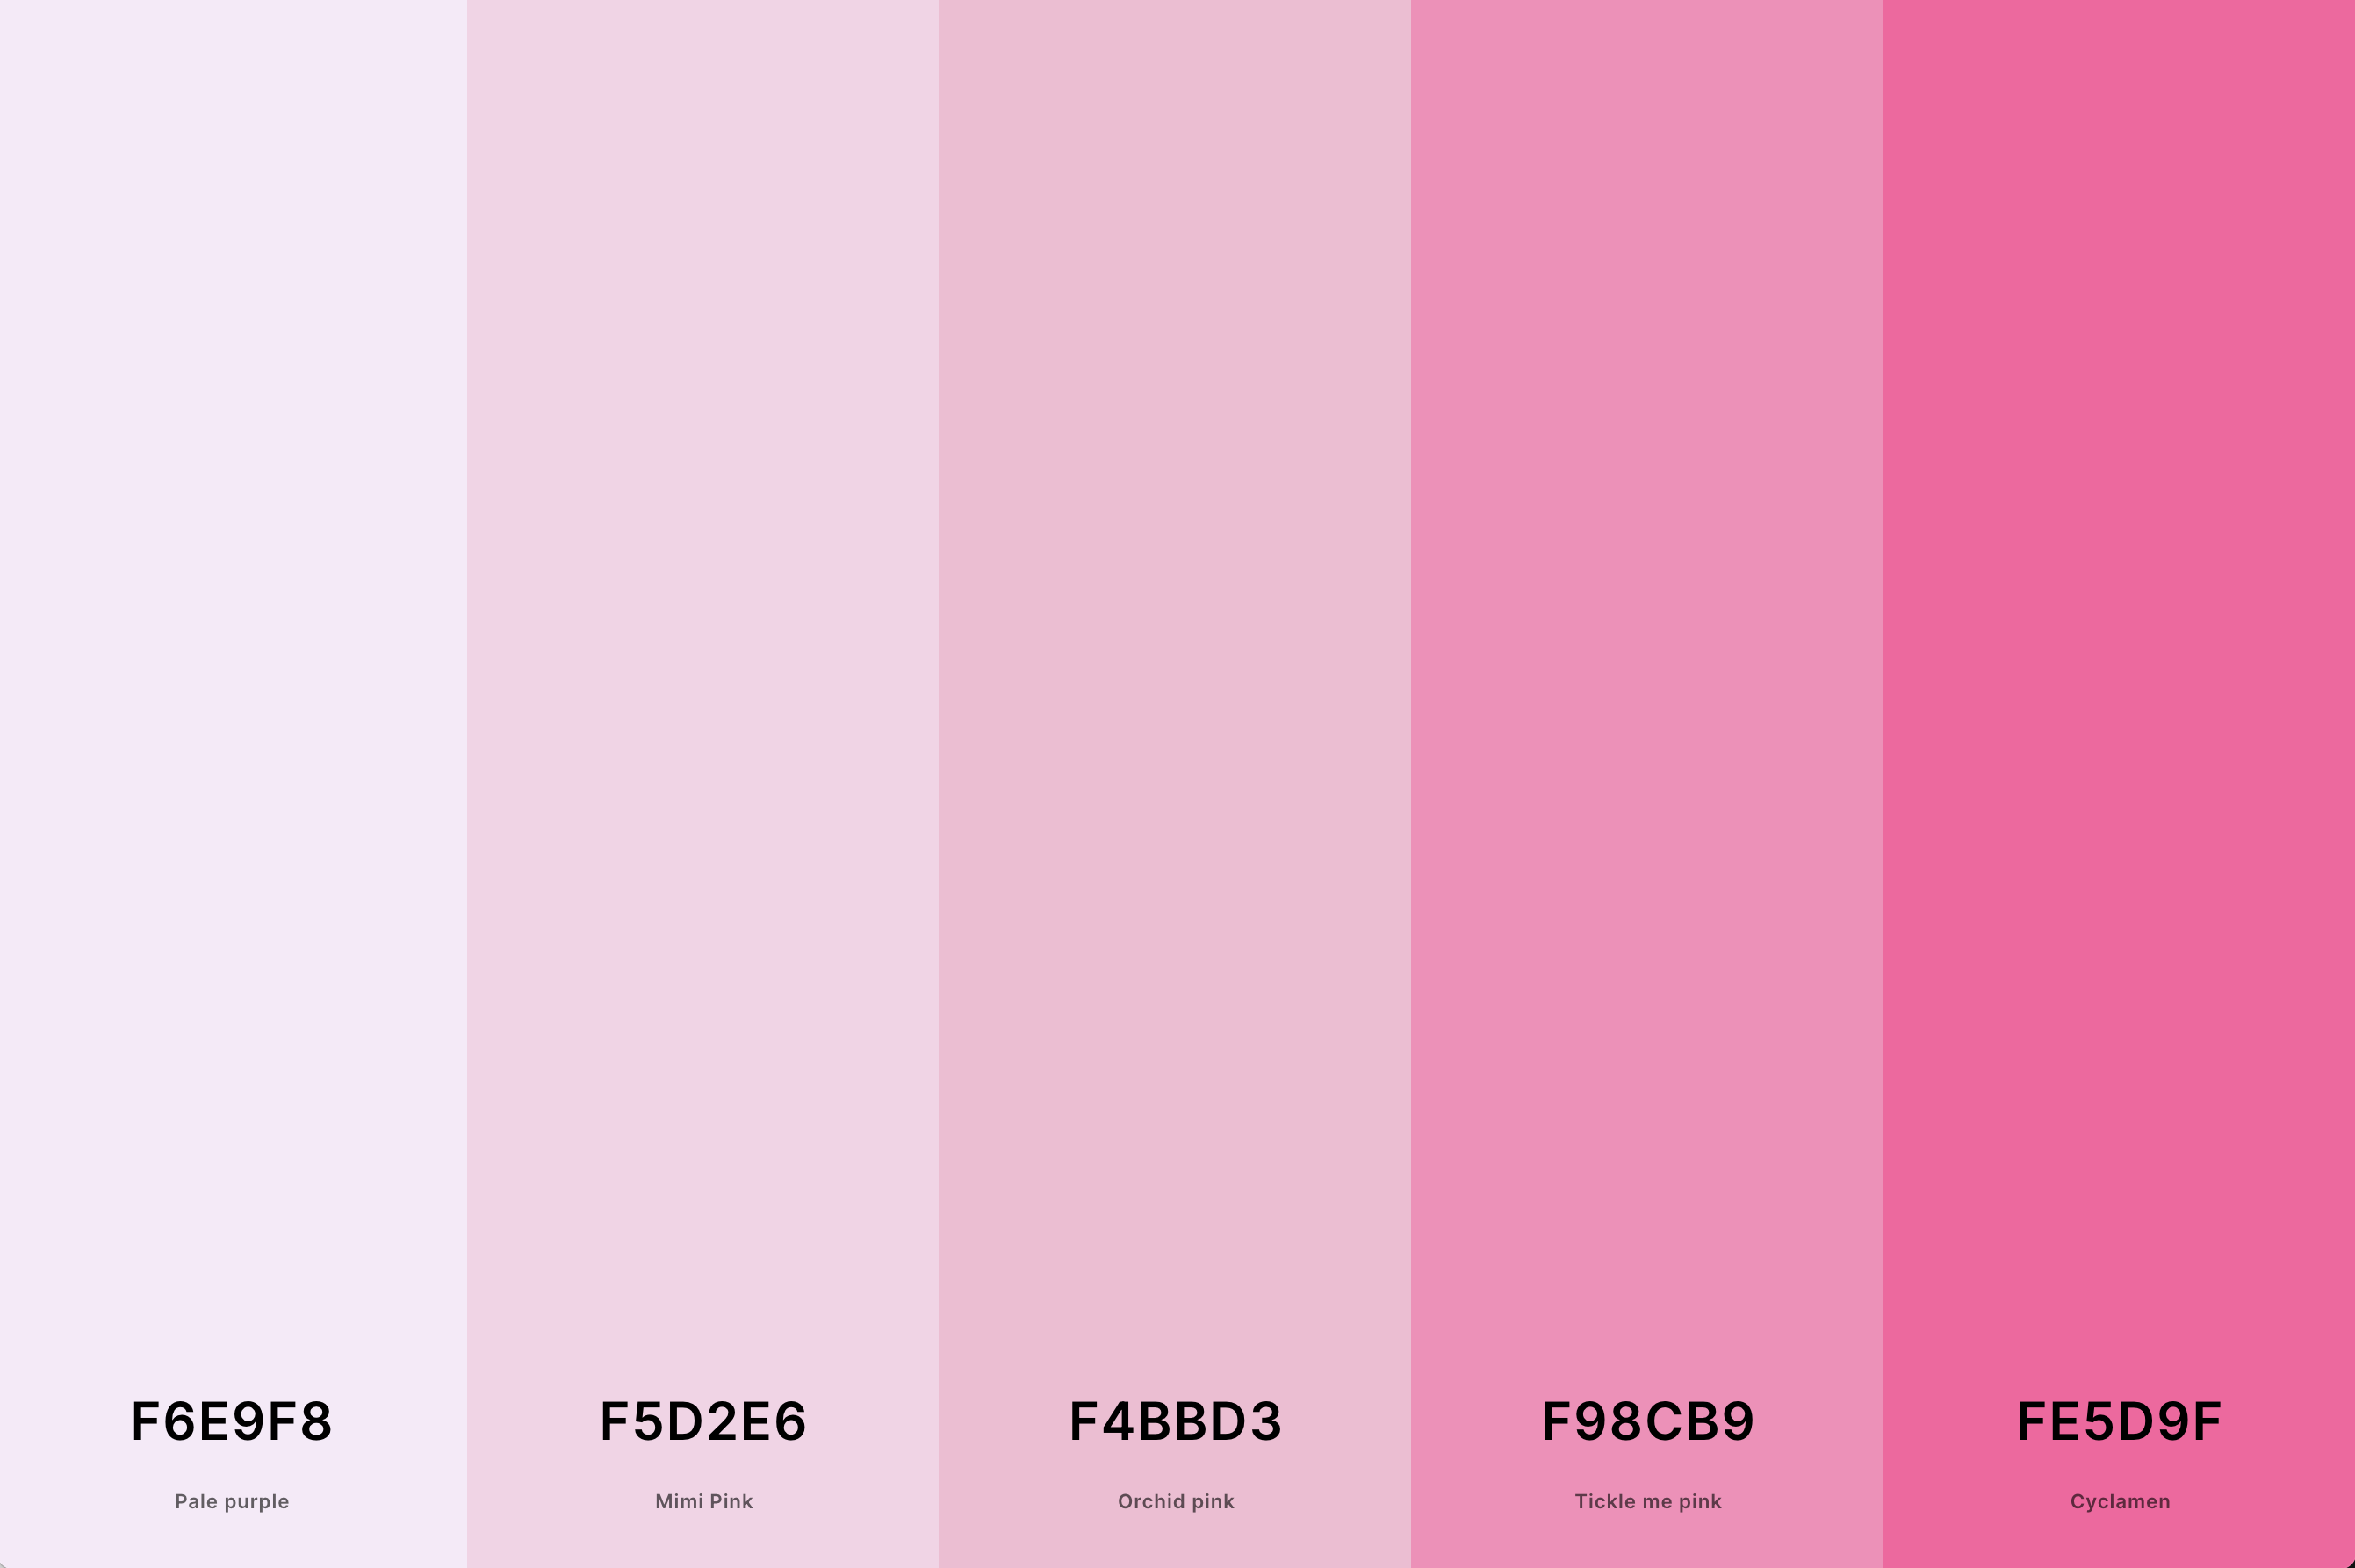 10. Aesthetic Pink Color Palette Color Palette with Pale Purple (Hex #F6E9F8) + Mimi Pink (Hex #F5D2E6) + Orchid Pink (Hex #F4BBD3) + Tickle Me Pink (Hex #F98CB9) + Cyclamen (Hex #FE5D9F) Color Palette with Hex Codes